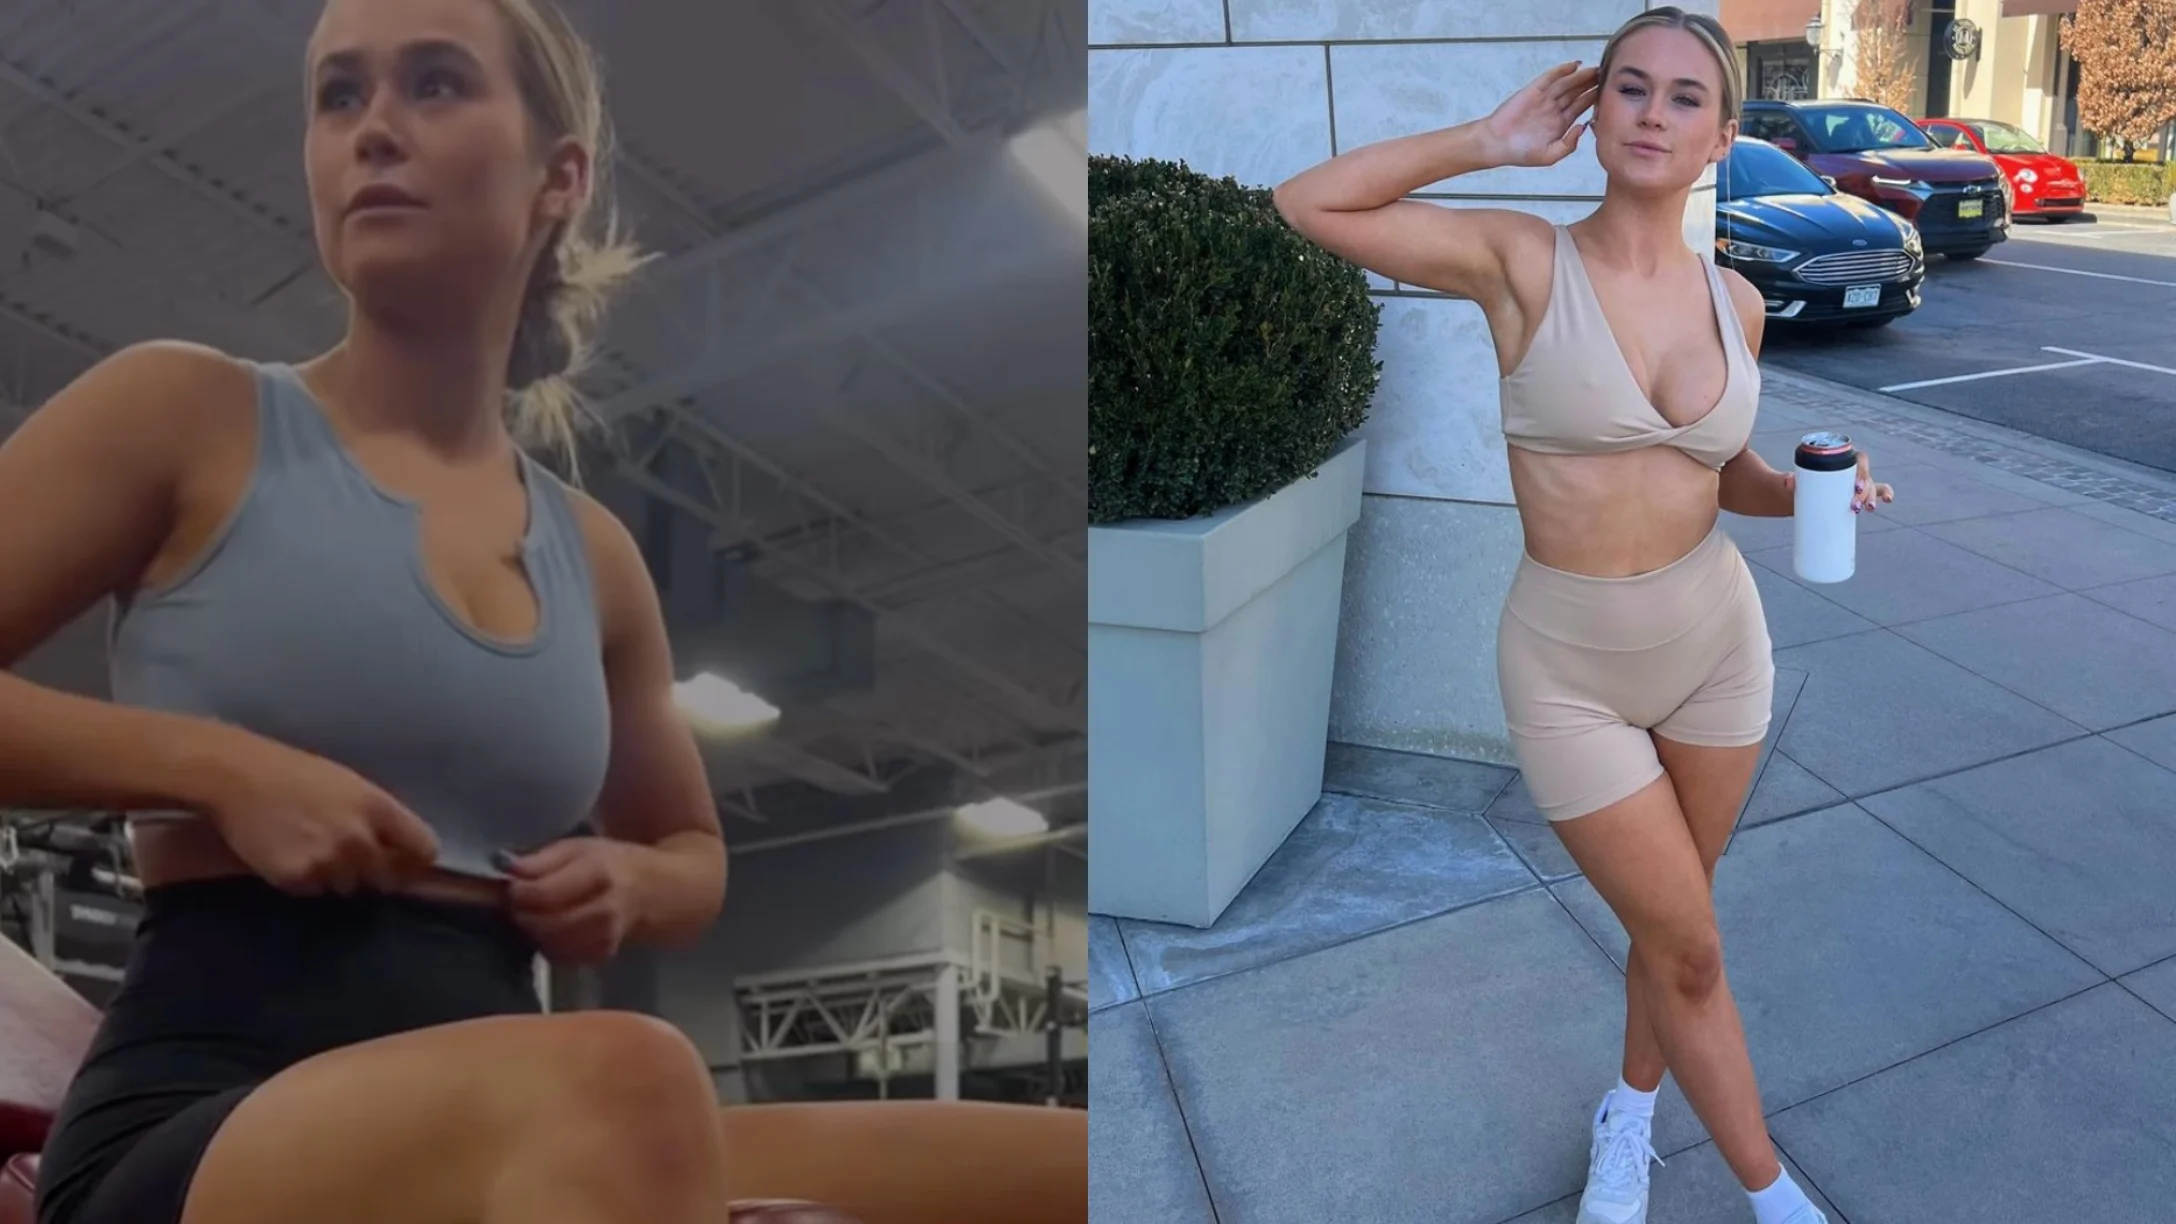 The best thing to wear to the gym if you have bigger boobs, according to a  fitness influencer who *knows*